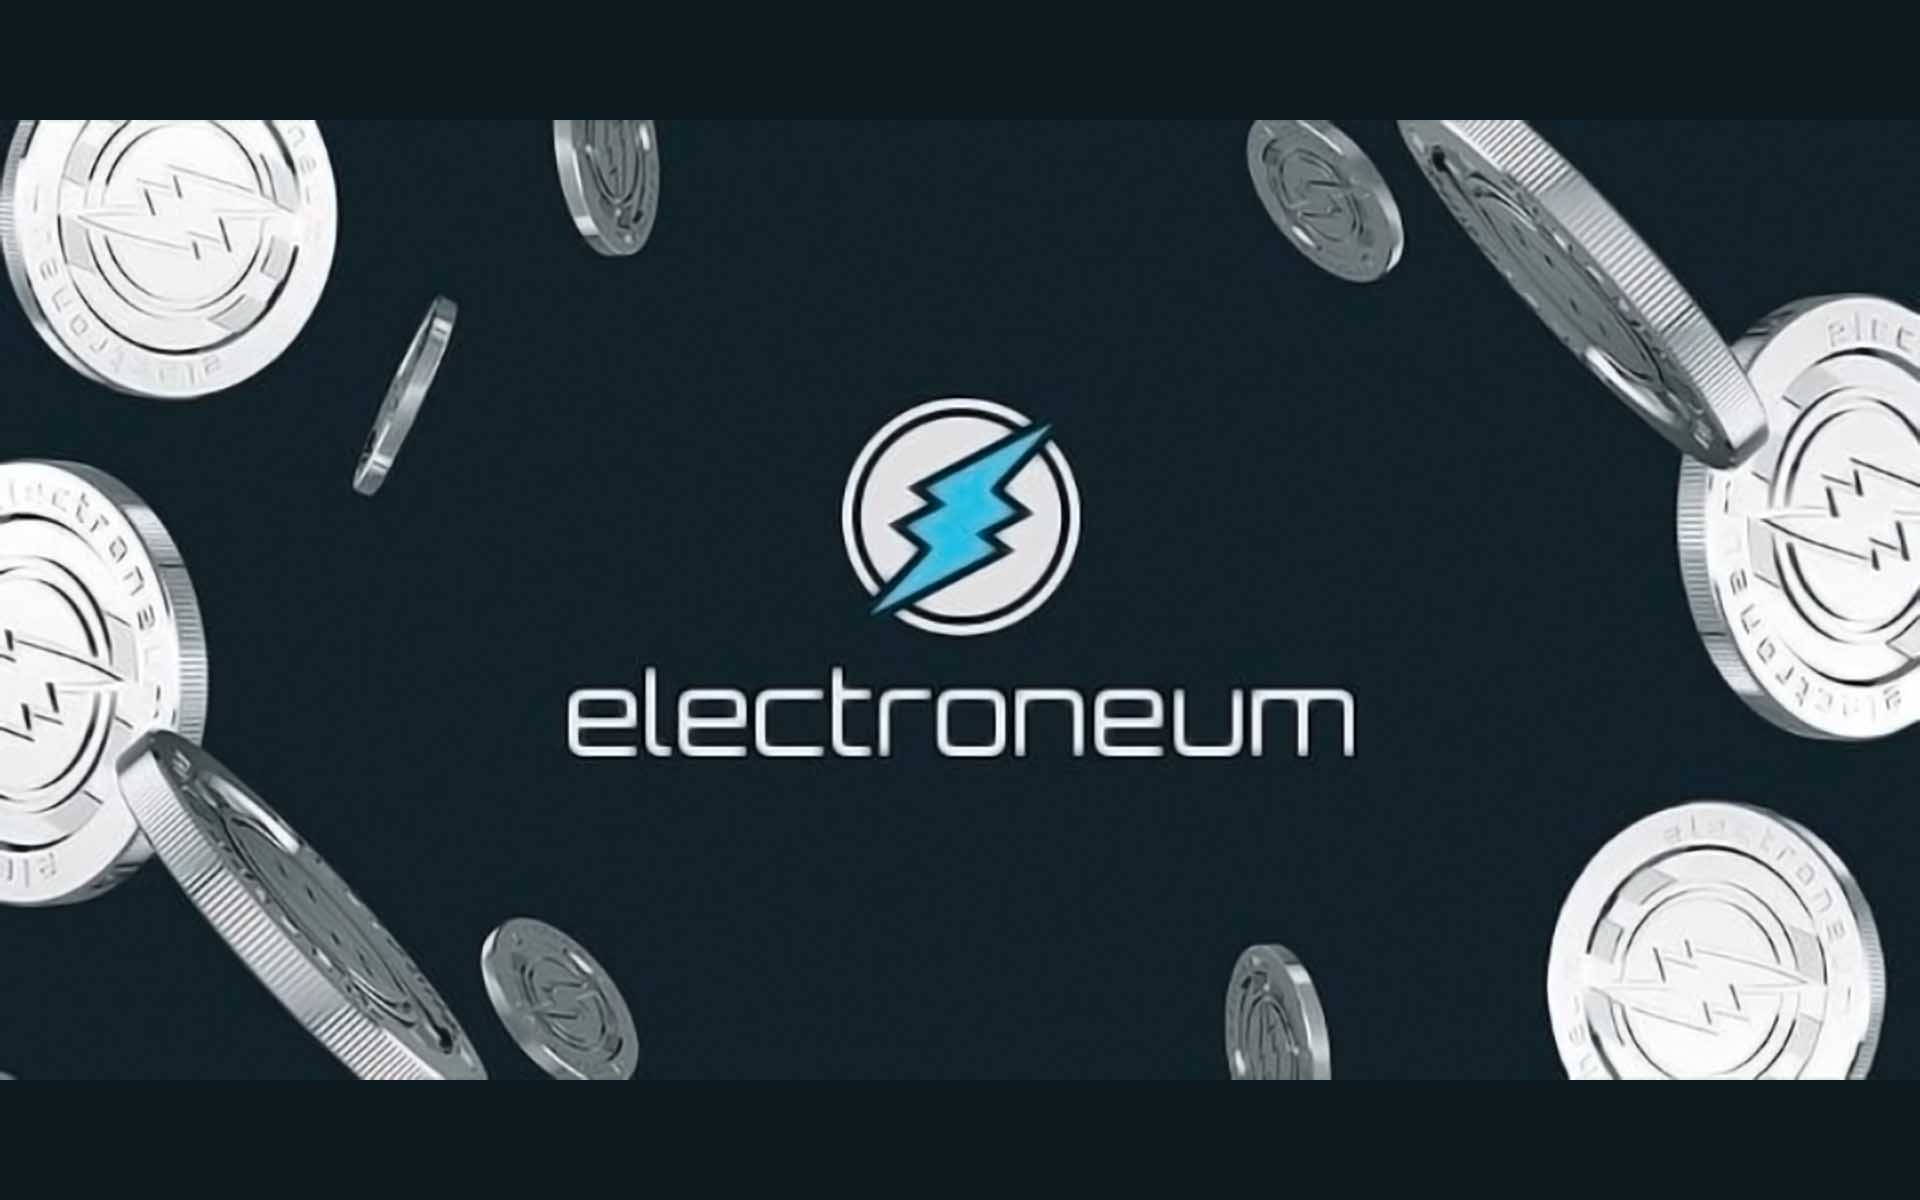 ETN-BTC Electroneum Exchange Buy/Sell Electroneum with Bitcoin